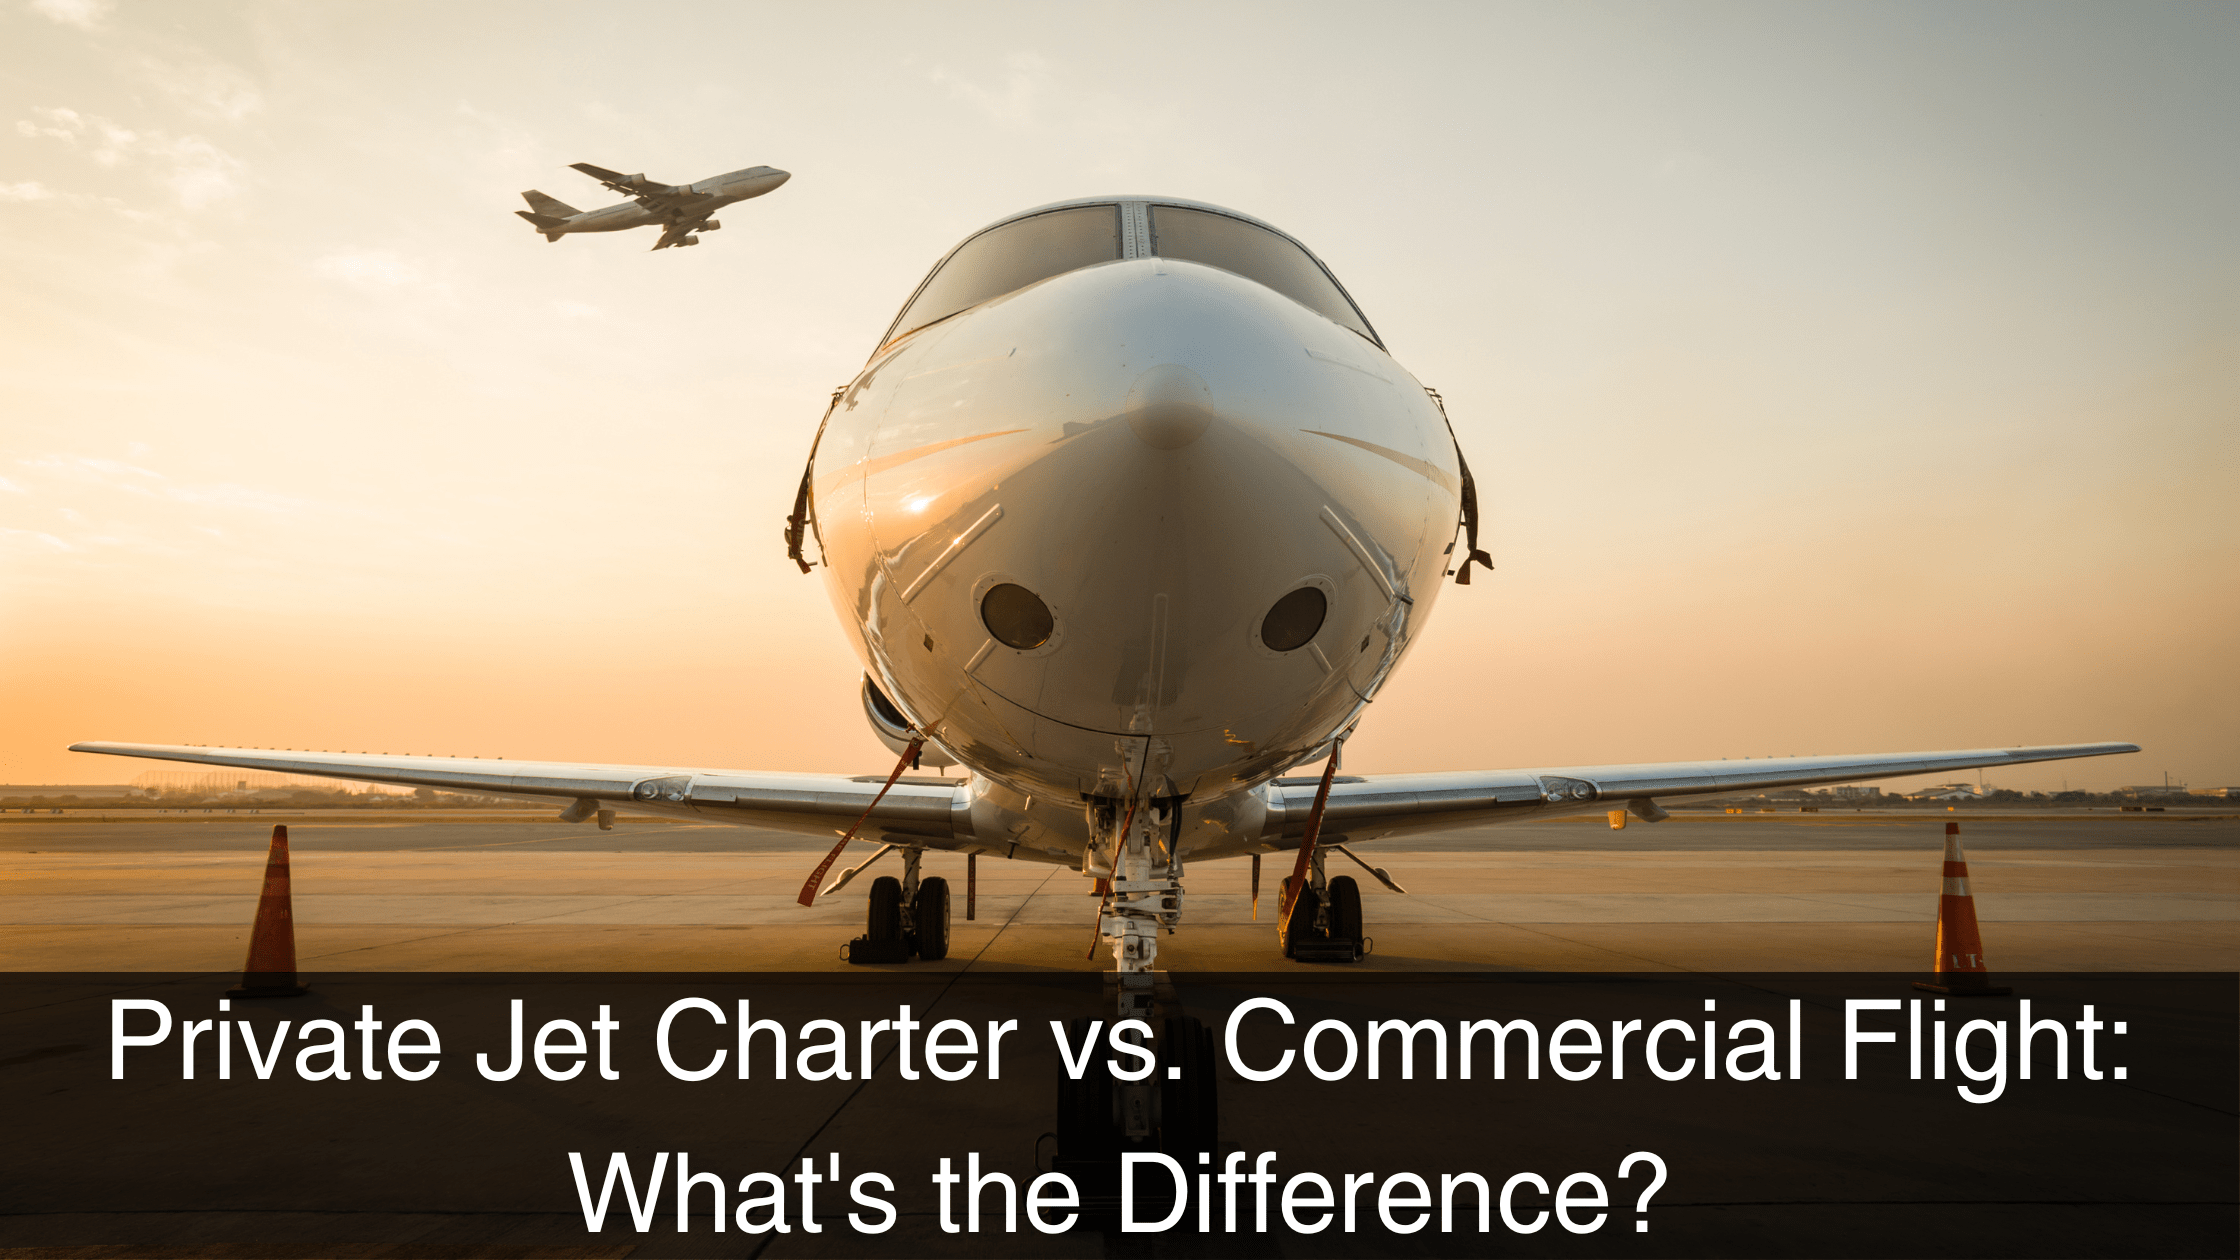 Private Jet Charter vs. Commercial Flight: What's the Difference?